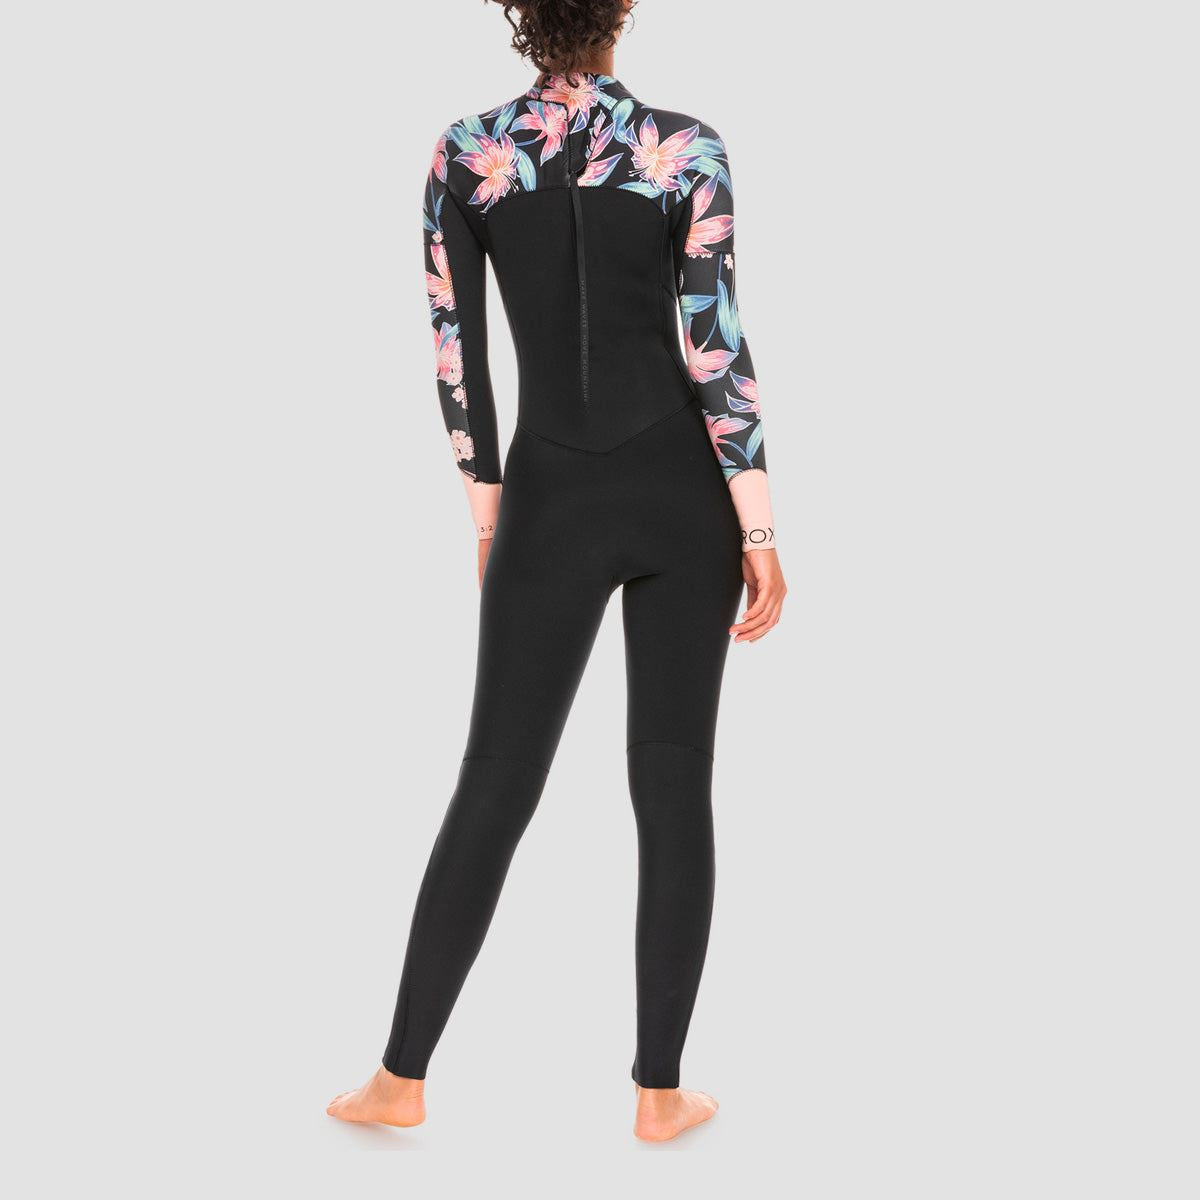 Roxy Swell Series 4/3mm Back Zip Wetsuit Anthracite Paradise Found S - Womens